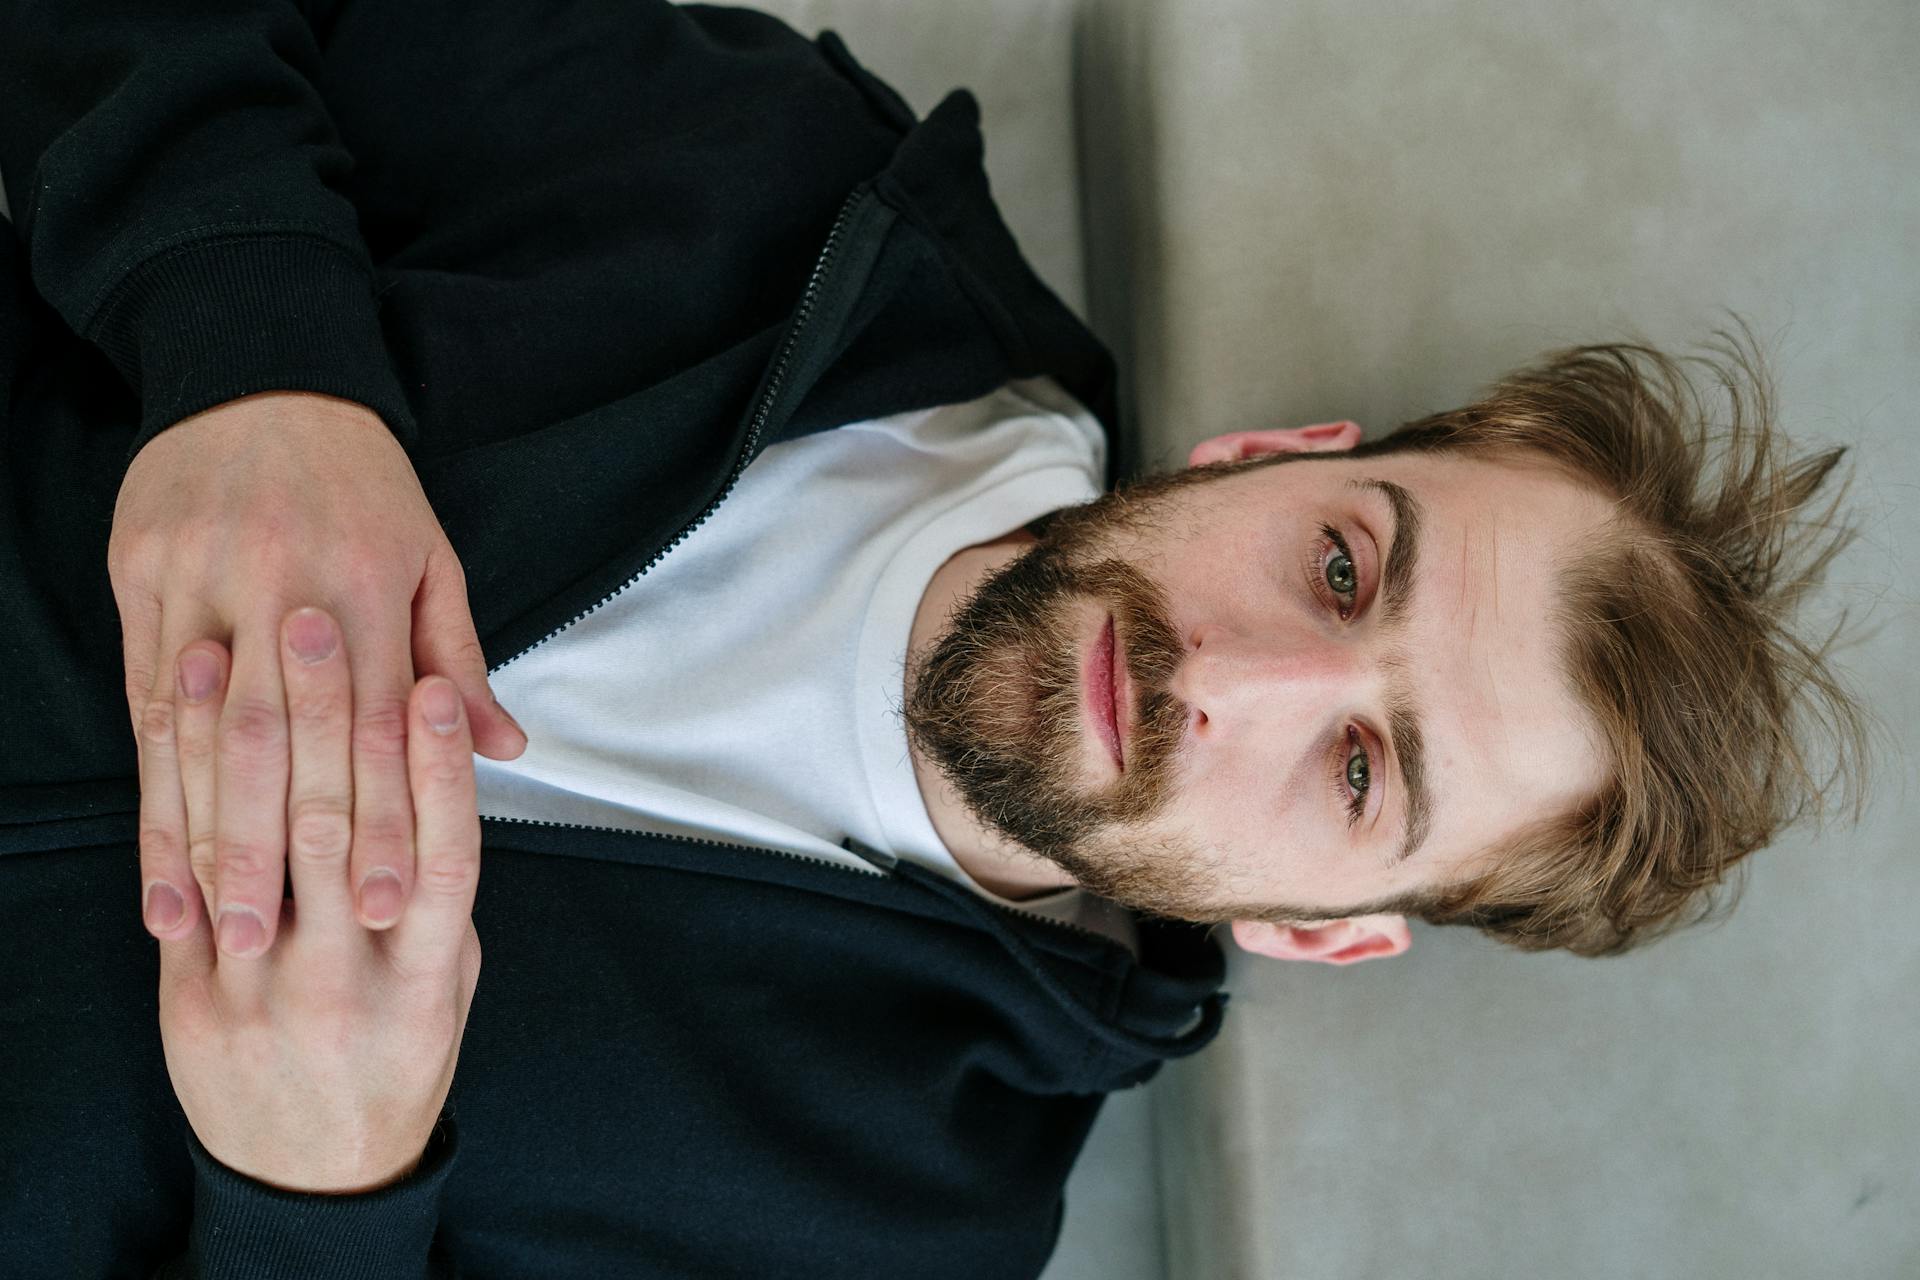 A man lying flat on a couch | Source: Pexels